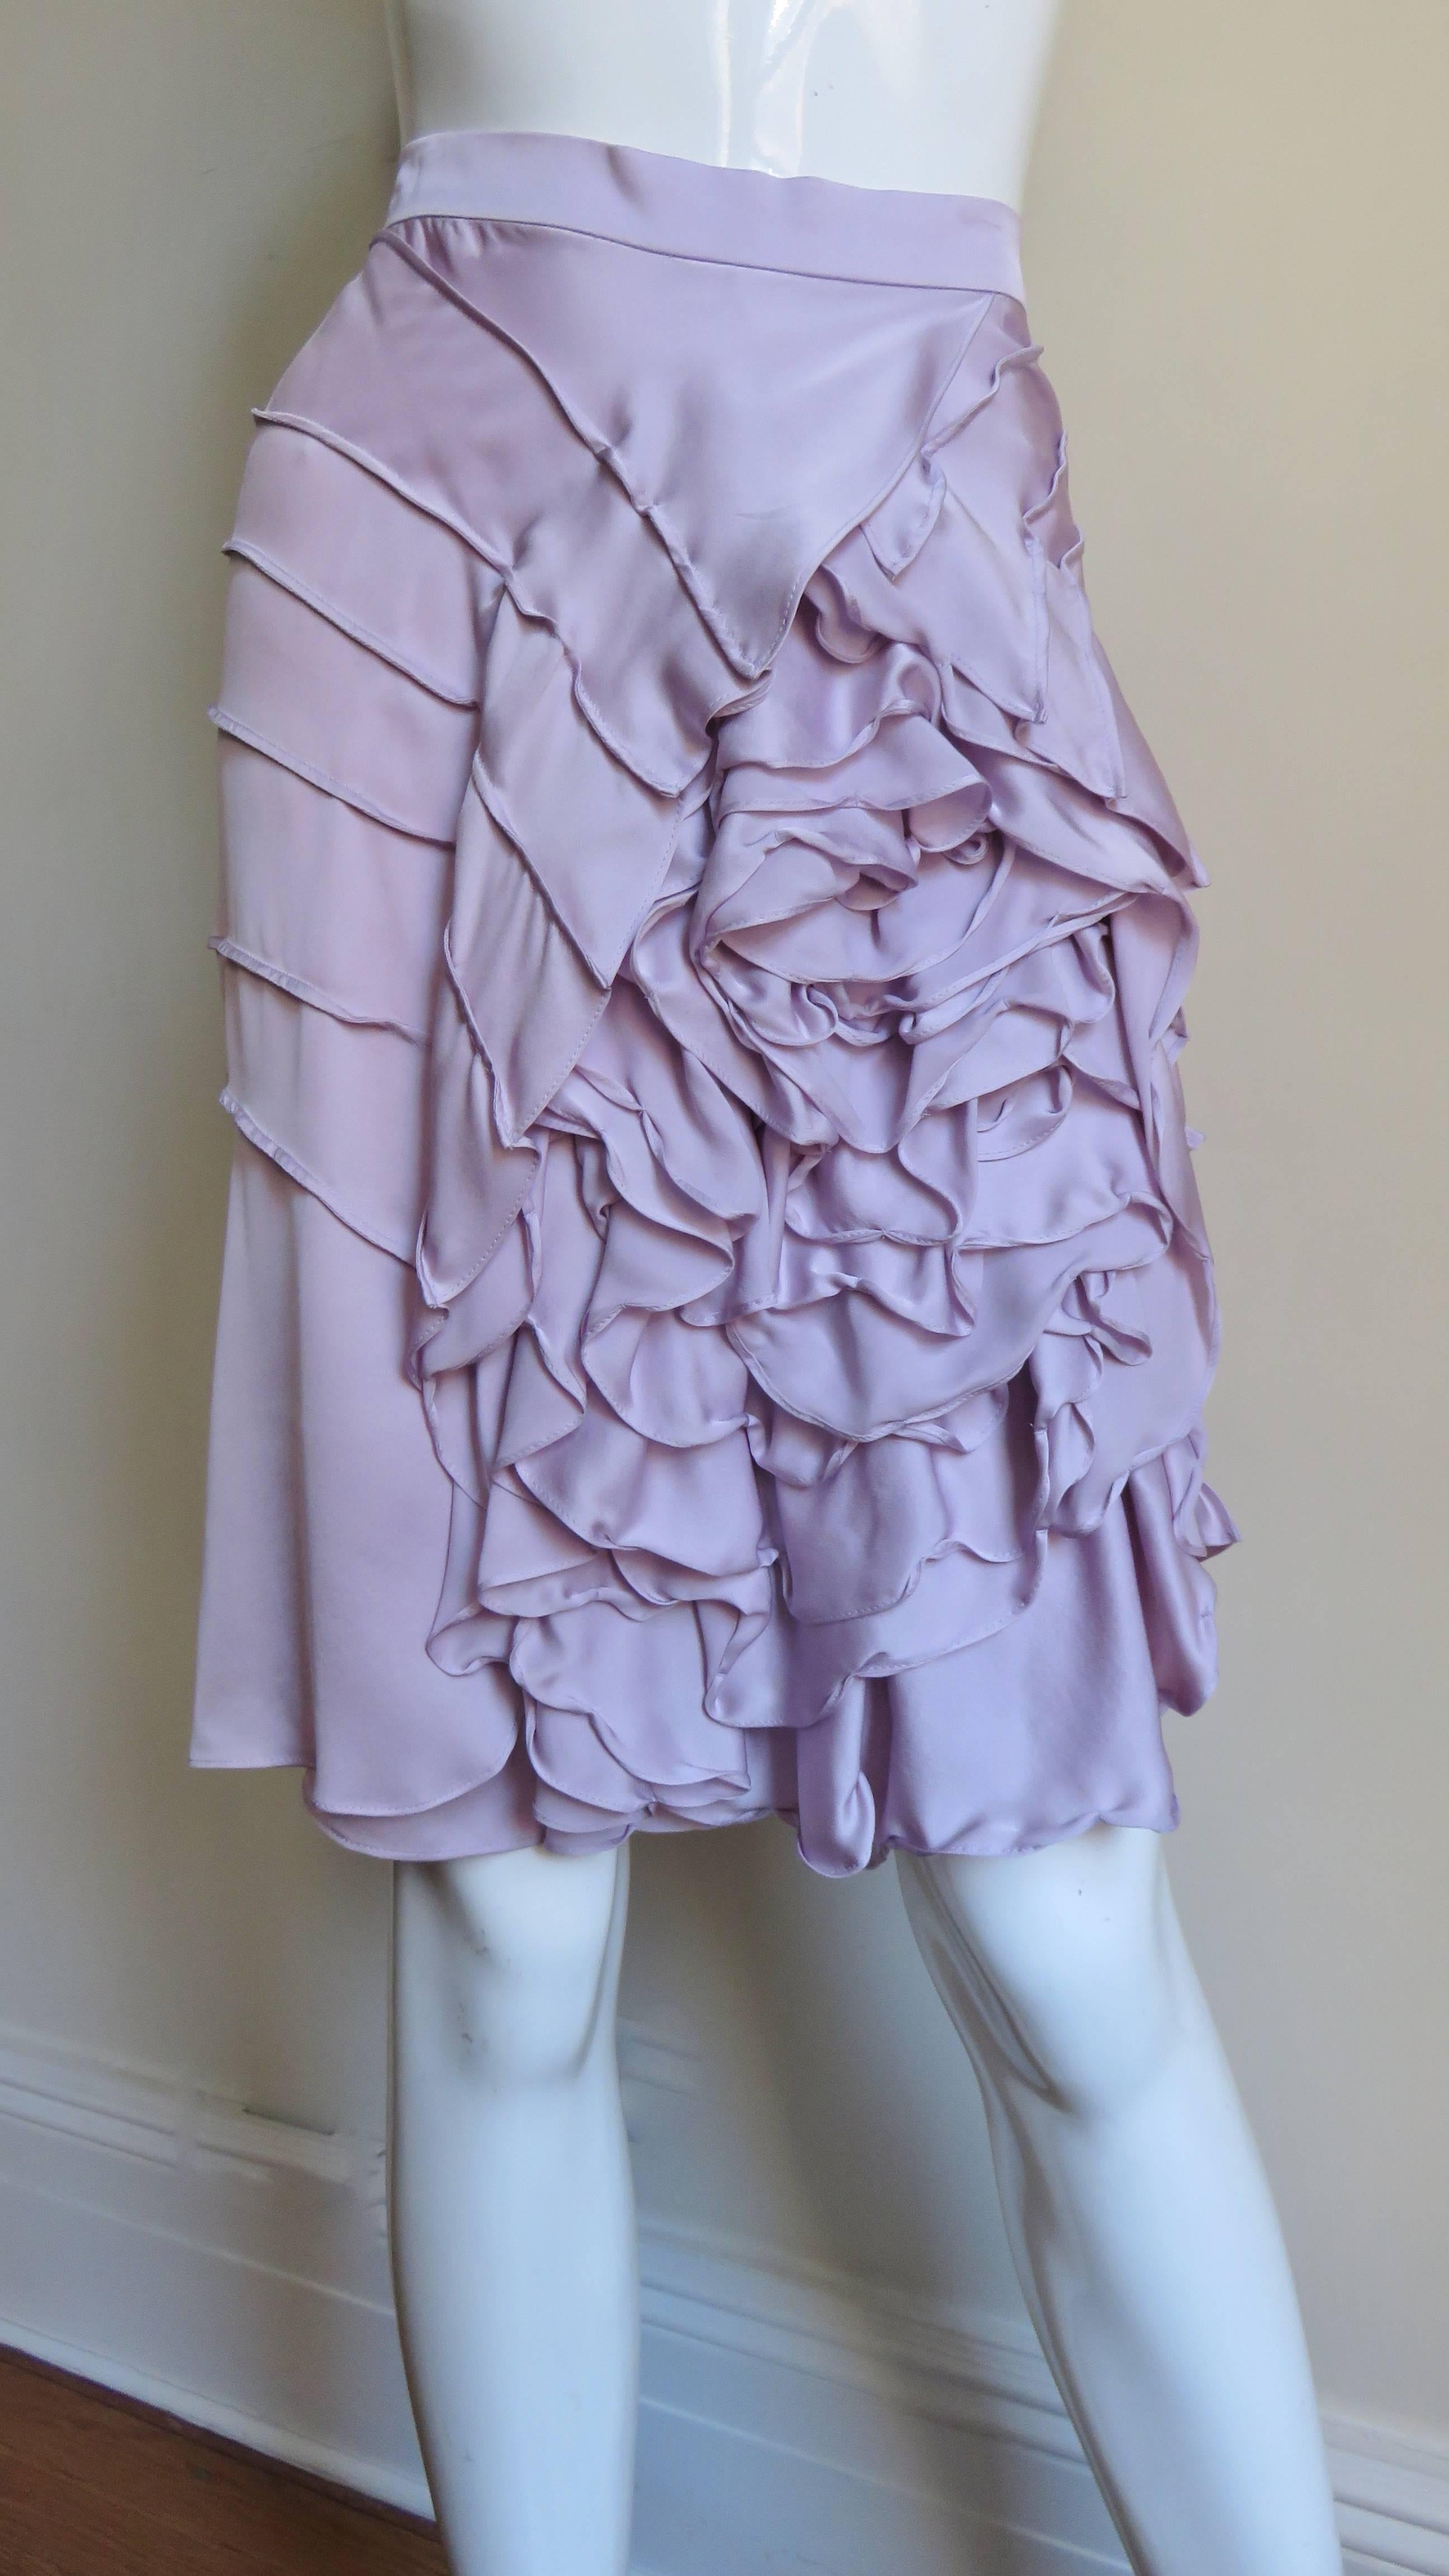 This is a gorgeous lavender silk charmeuse skirt by Tom Ford for Yves St Laurent, YSL.  It has a 1